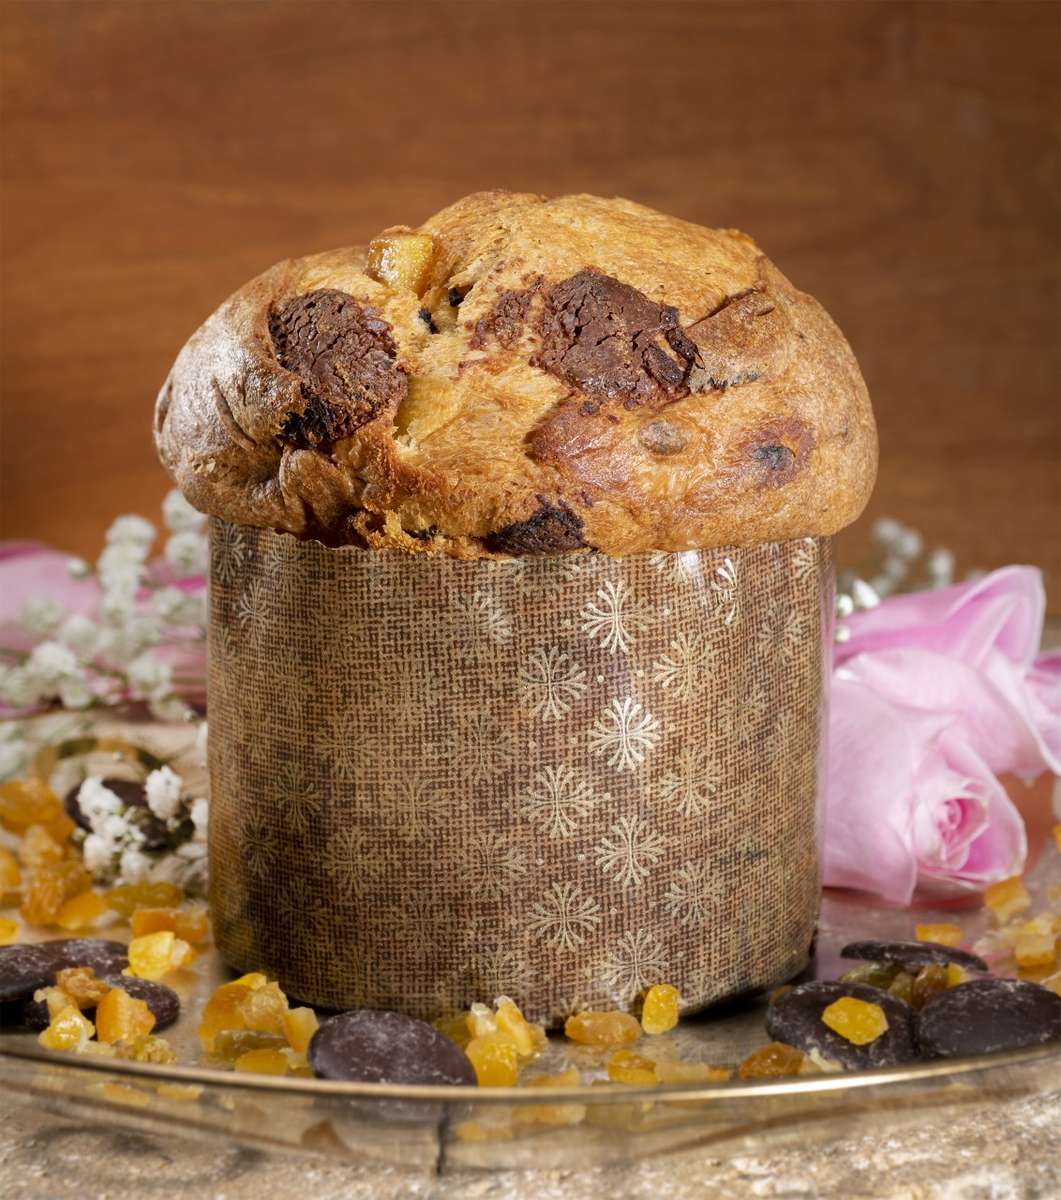 Valentine Panettone with chocolate from Ecuador on a gold-edged platter with bits of orange and chocolate, background with pink roses and white baby's breath.